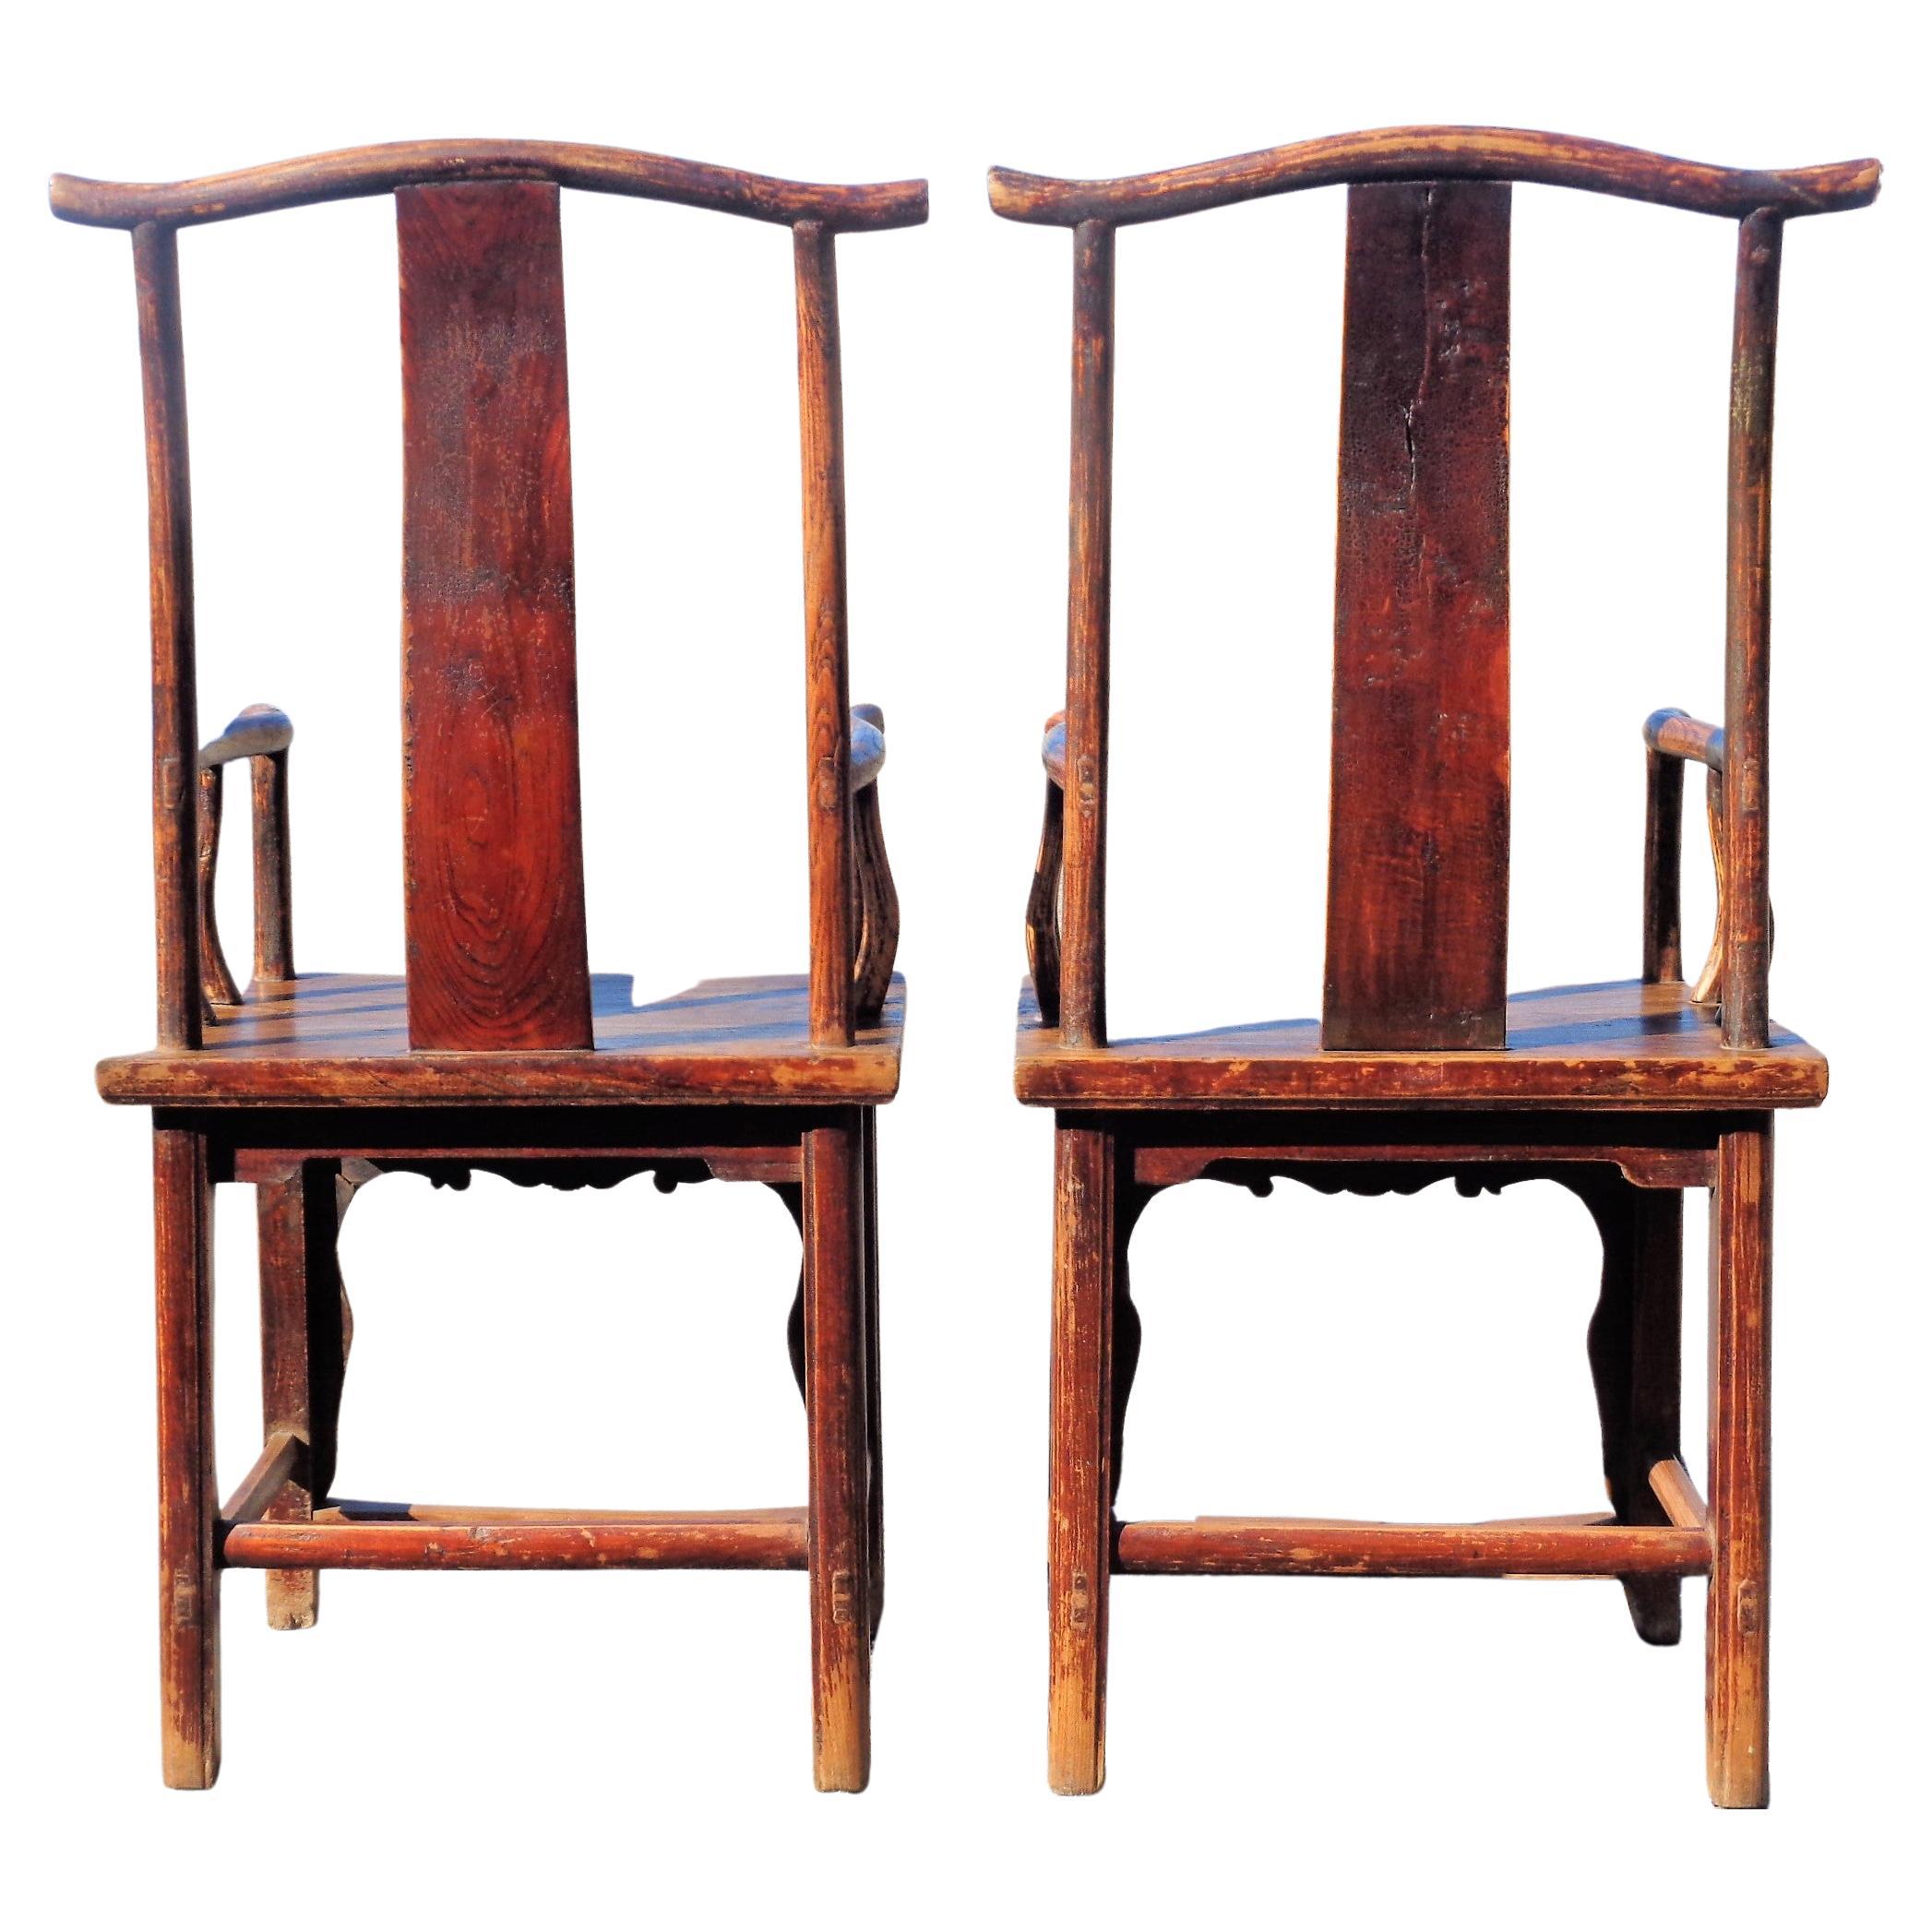 19th C. Chinese Qing Dynasty Hardwood Official's Cap Armchairs  For Sale 2